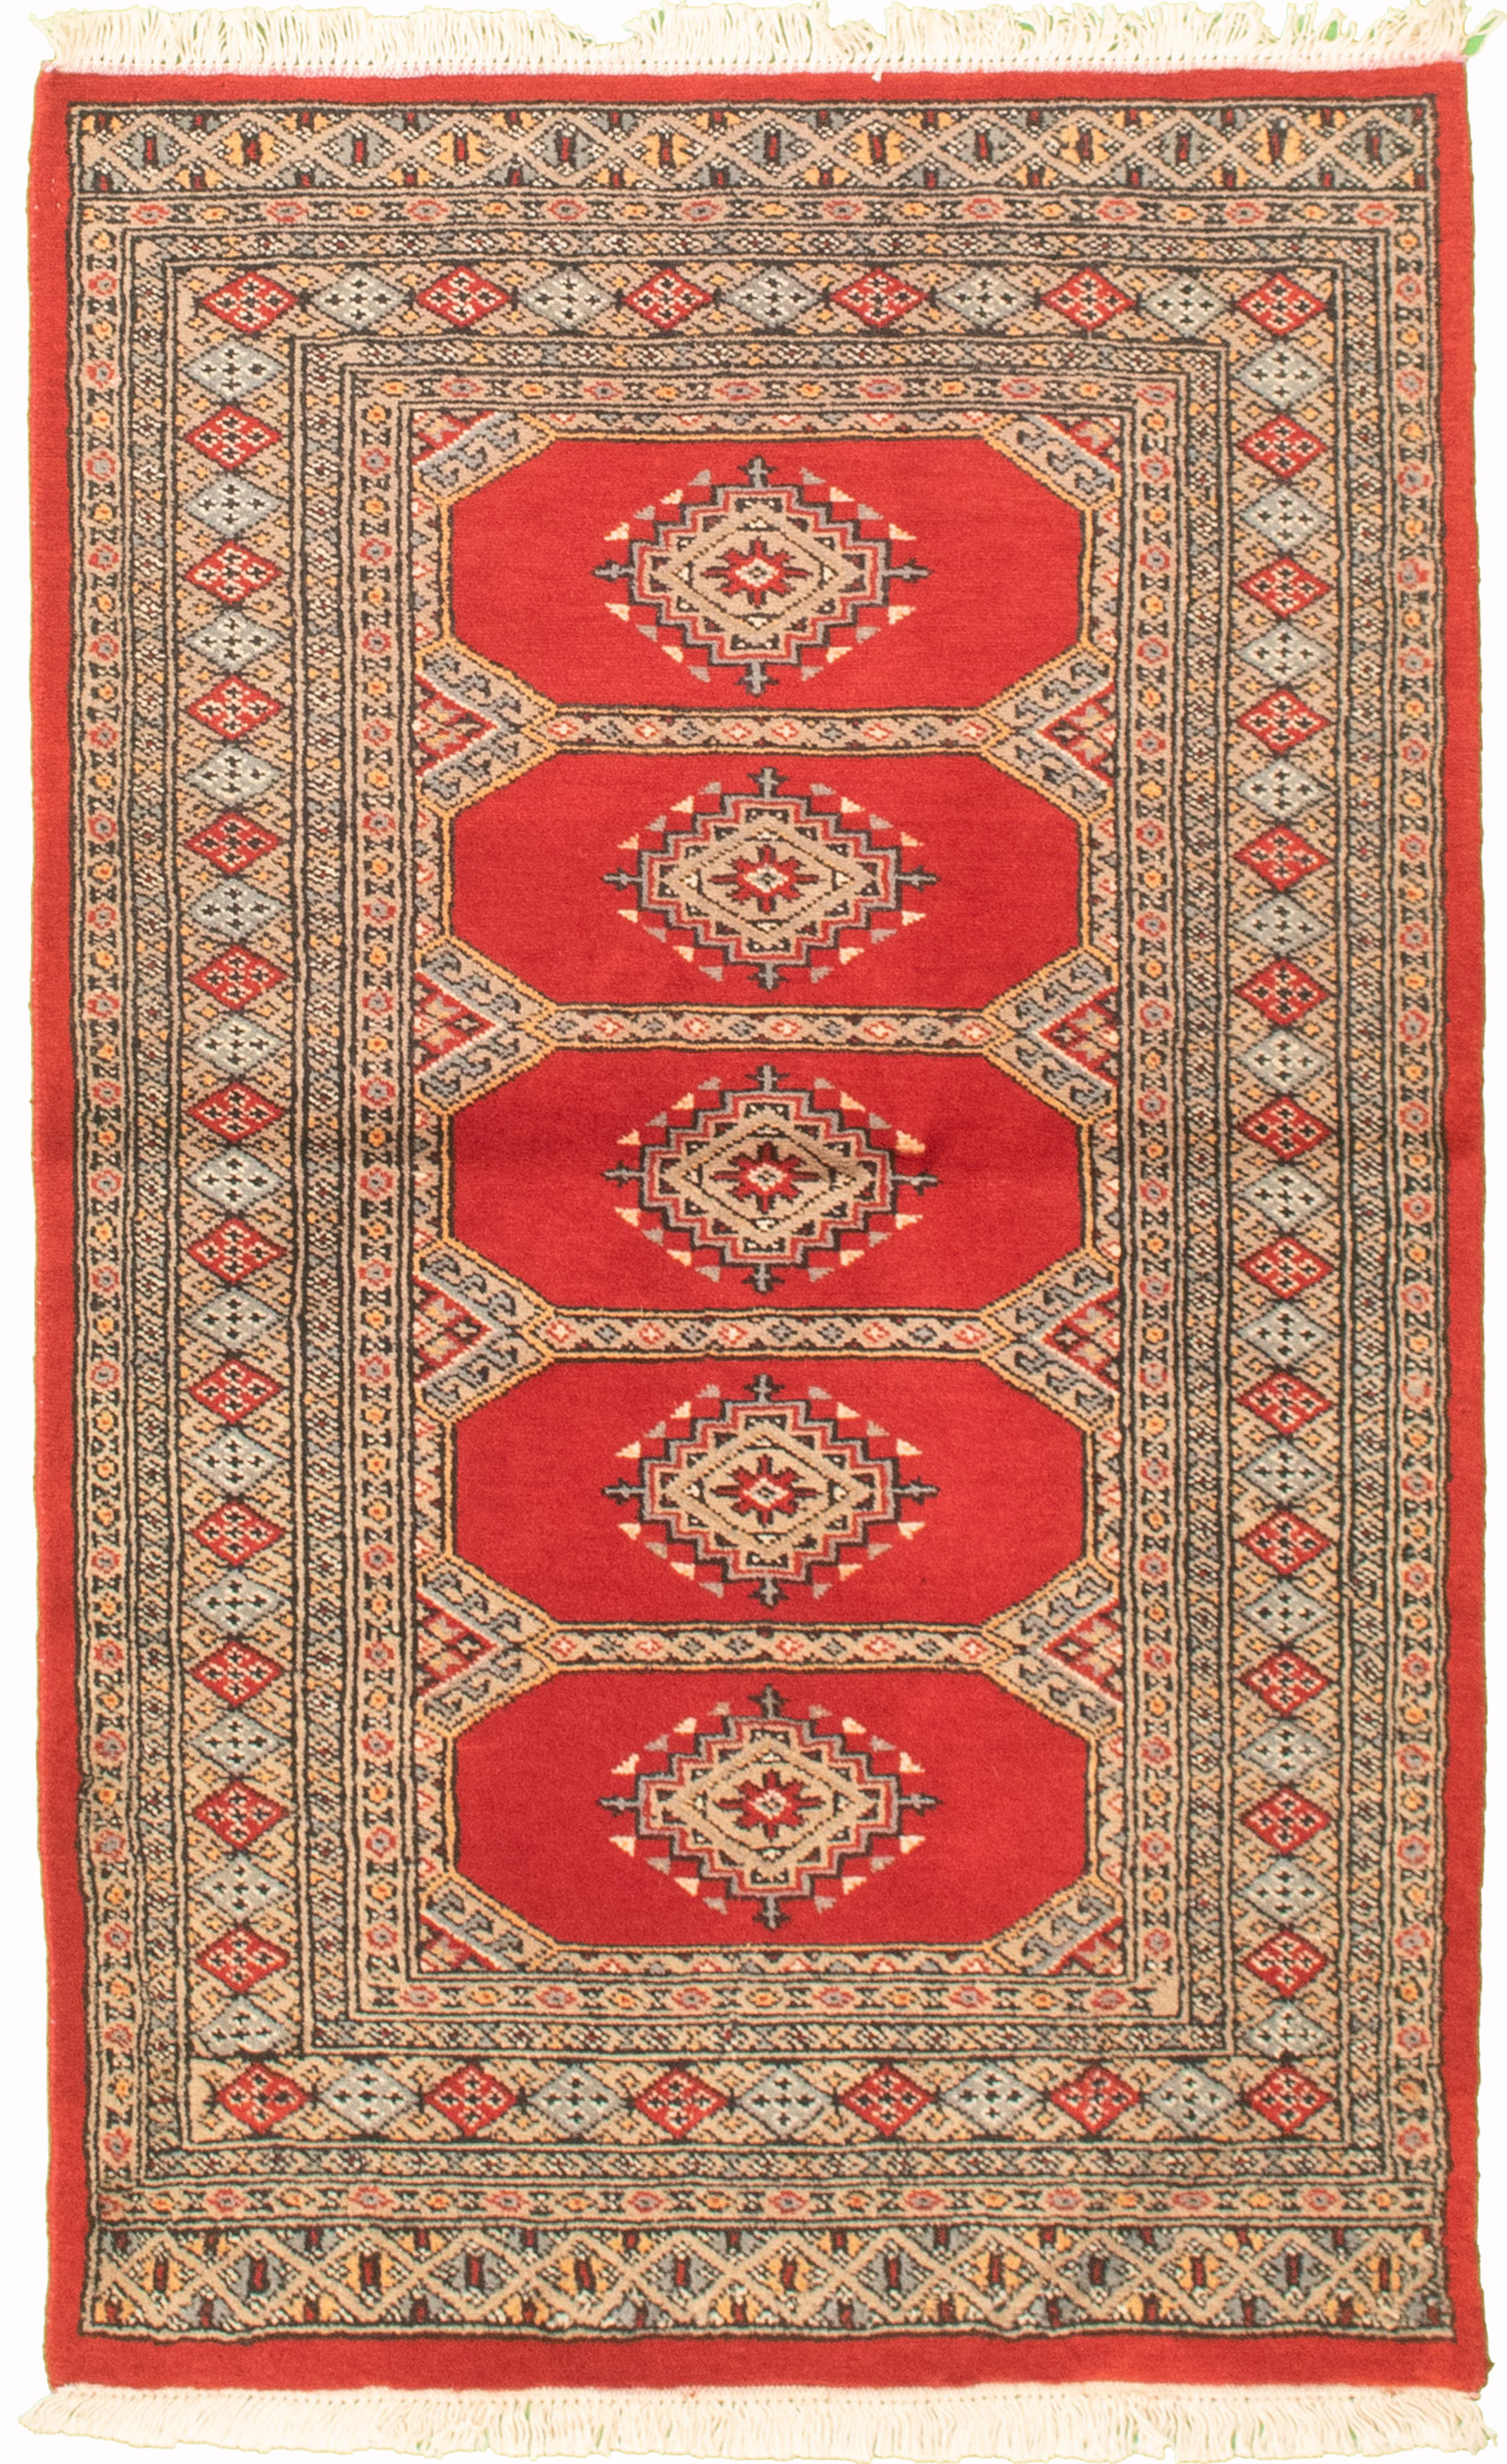 Hand-knotted Finest Peshawar Bokhara Red Wool Rug 2'11" x 5'1" Size: 2'11" x 5'1"  